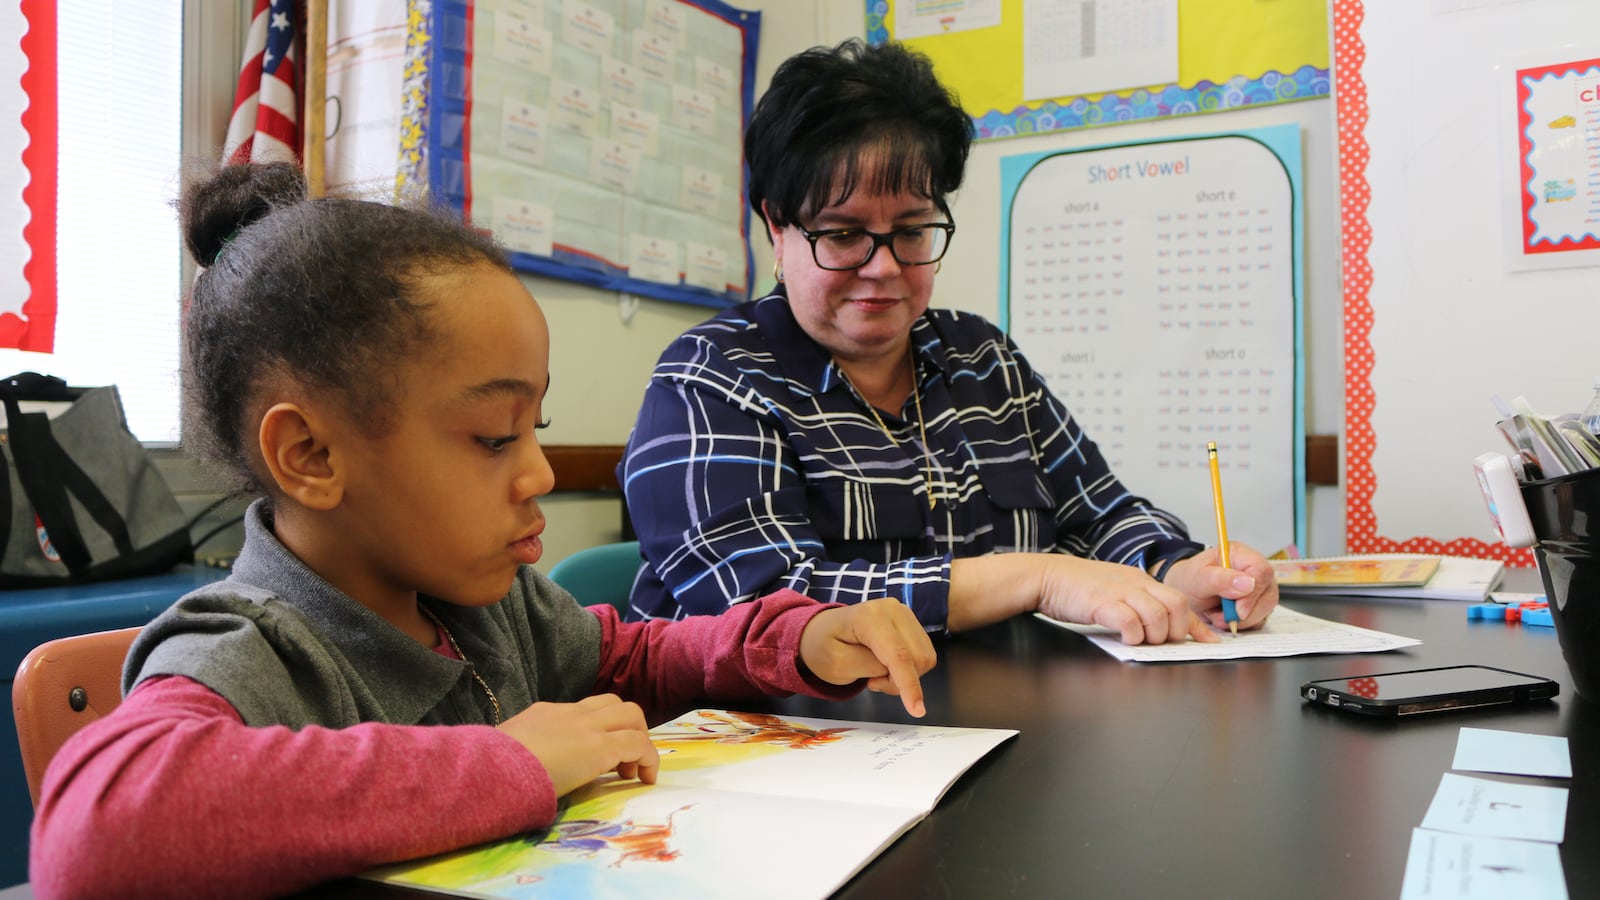 Eileen Bramer (right) conducts a reading intervention with Peyton, a first grader at P.S. 111 in Queens.